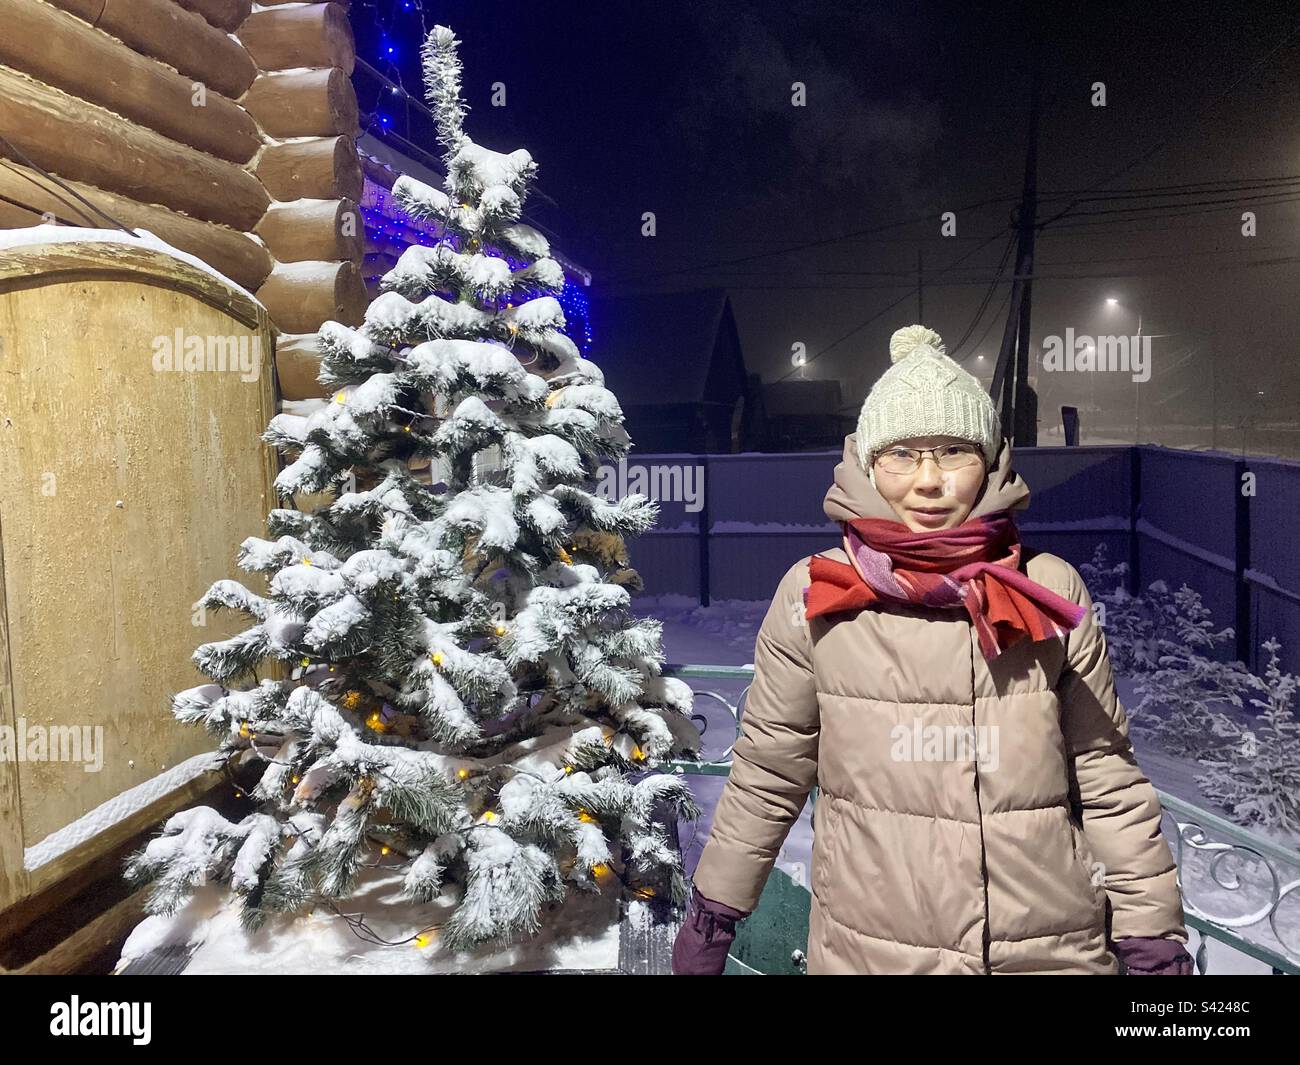 A frozen Yakut Asian girl with glasses stands in winter in the cold at a Christmas tree with snow in the village of Yakutia. Stock Photo